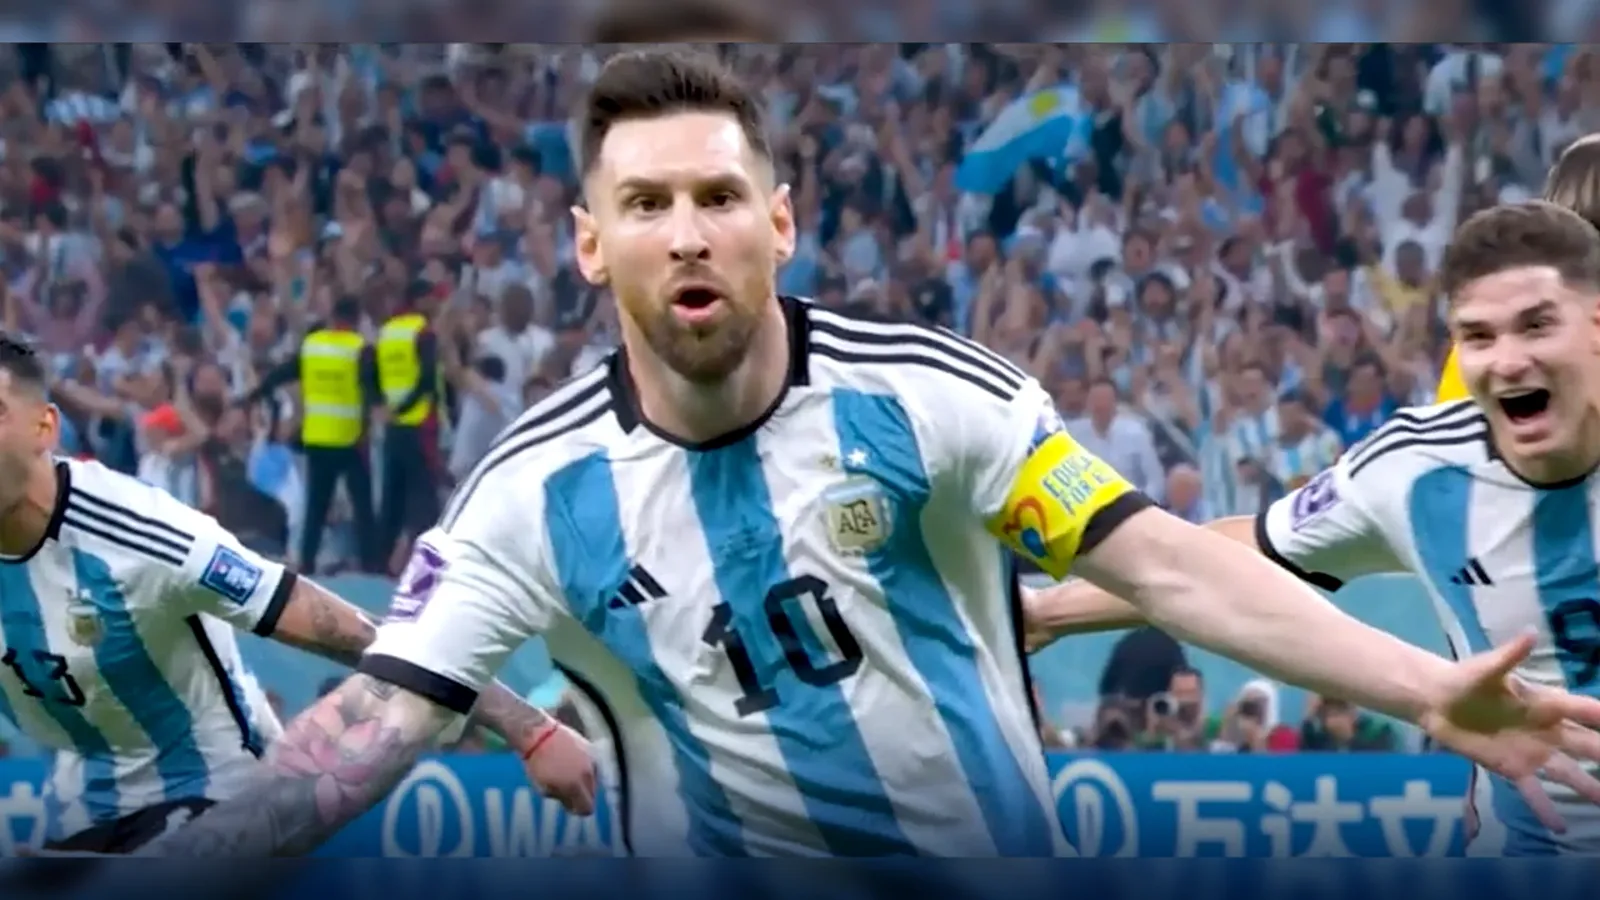 Lionel Messi brings glory to Argentina in the 2022 FIFA World Cup